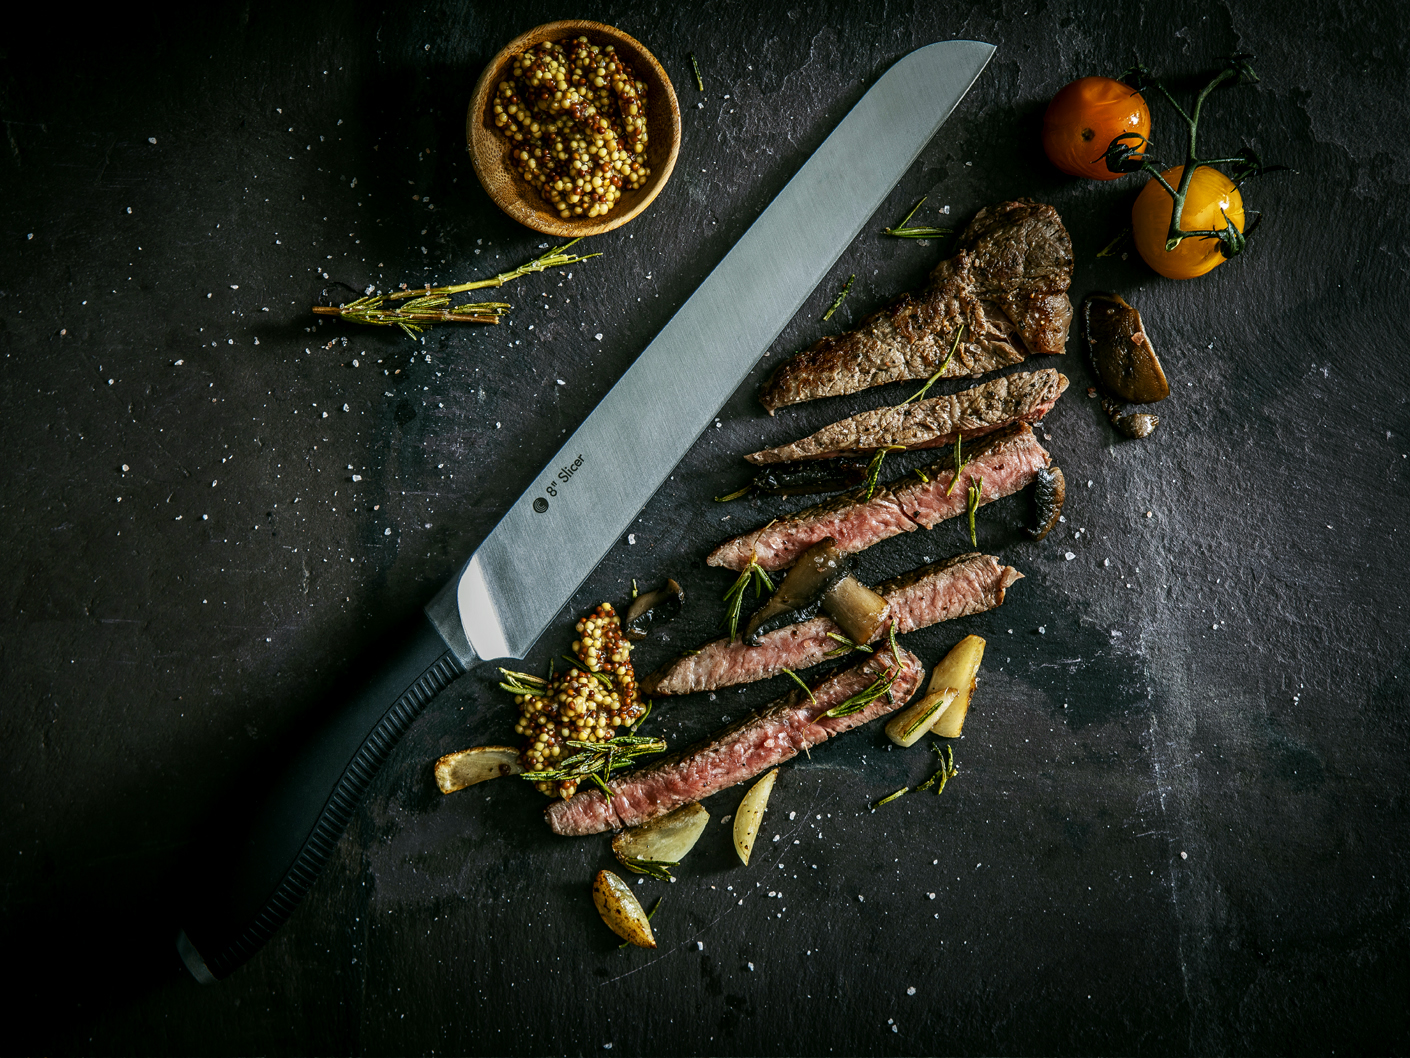 Product photography of knifes